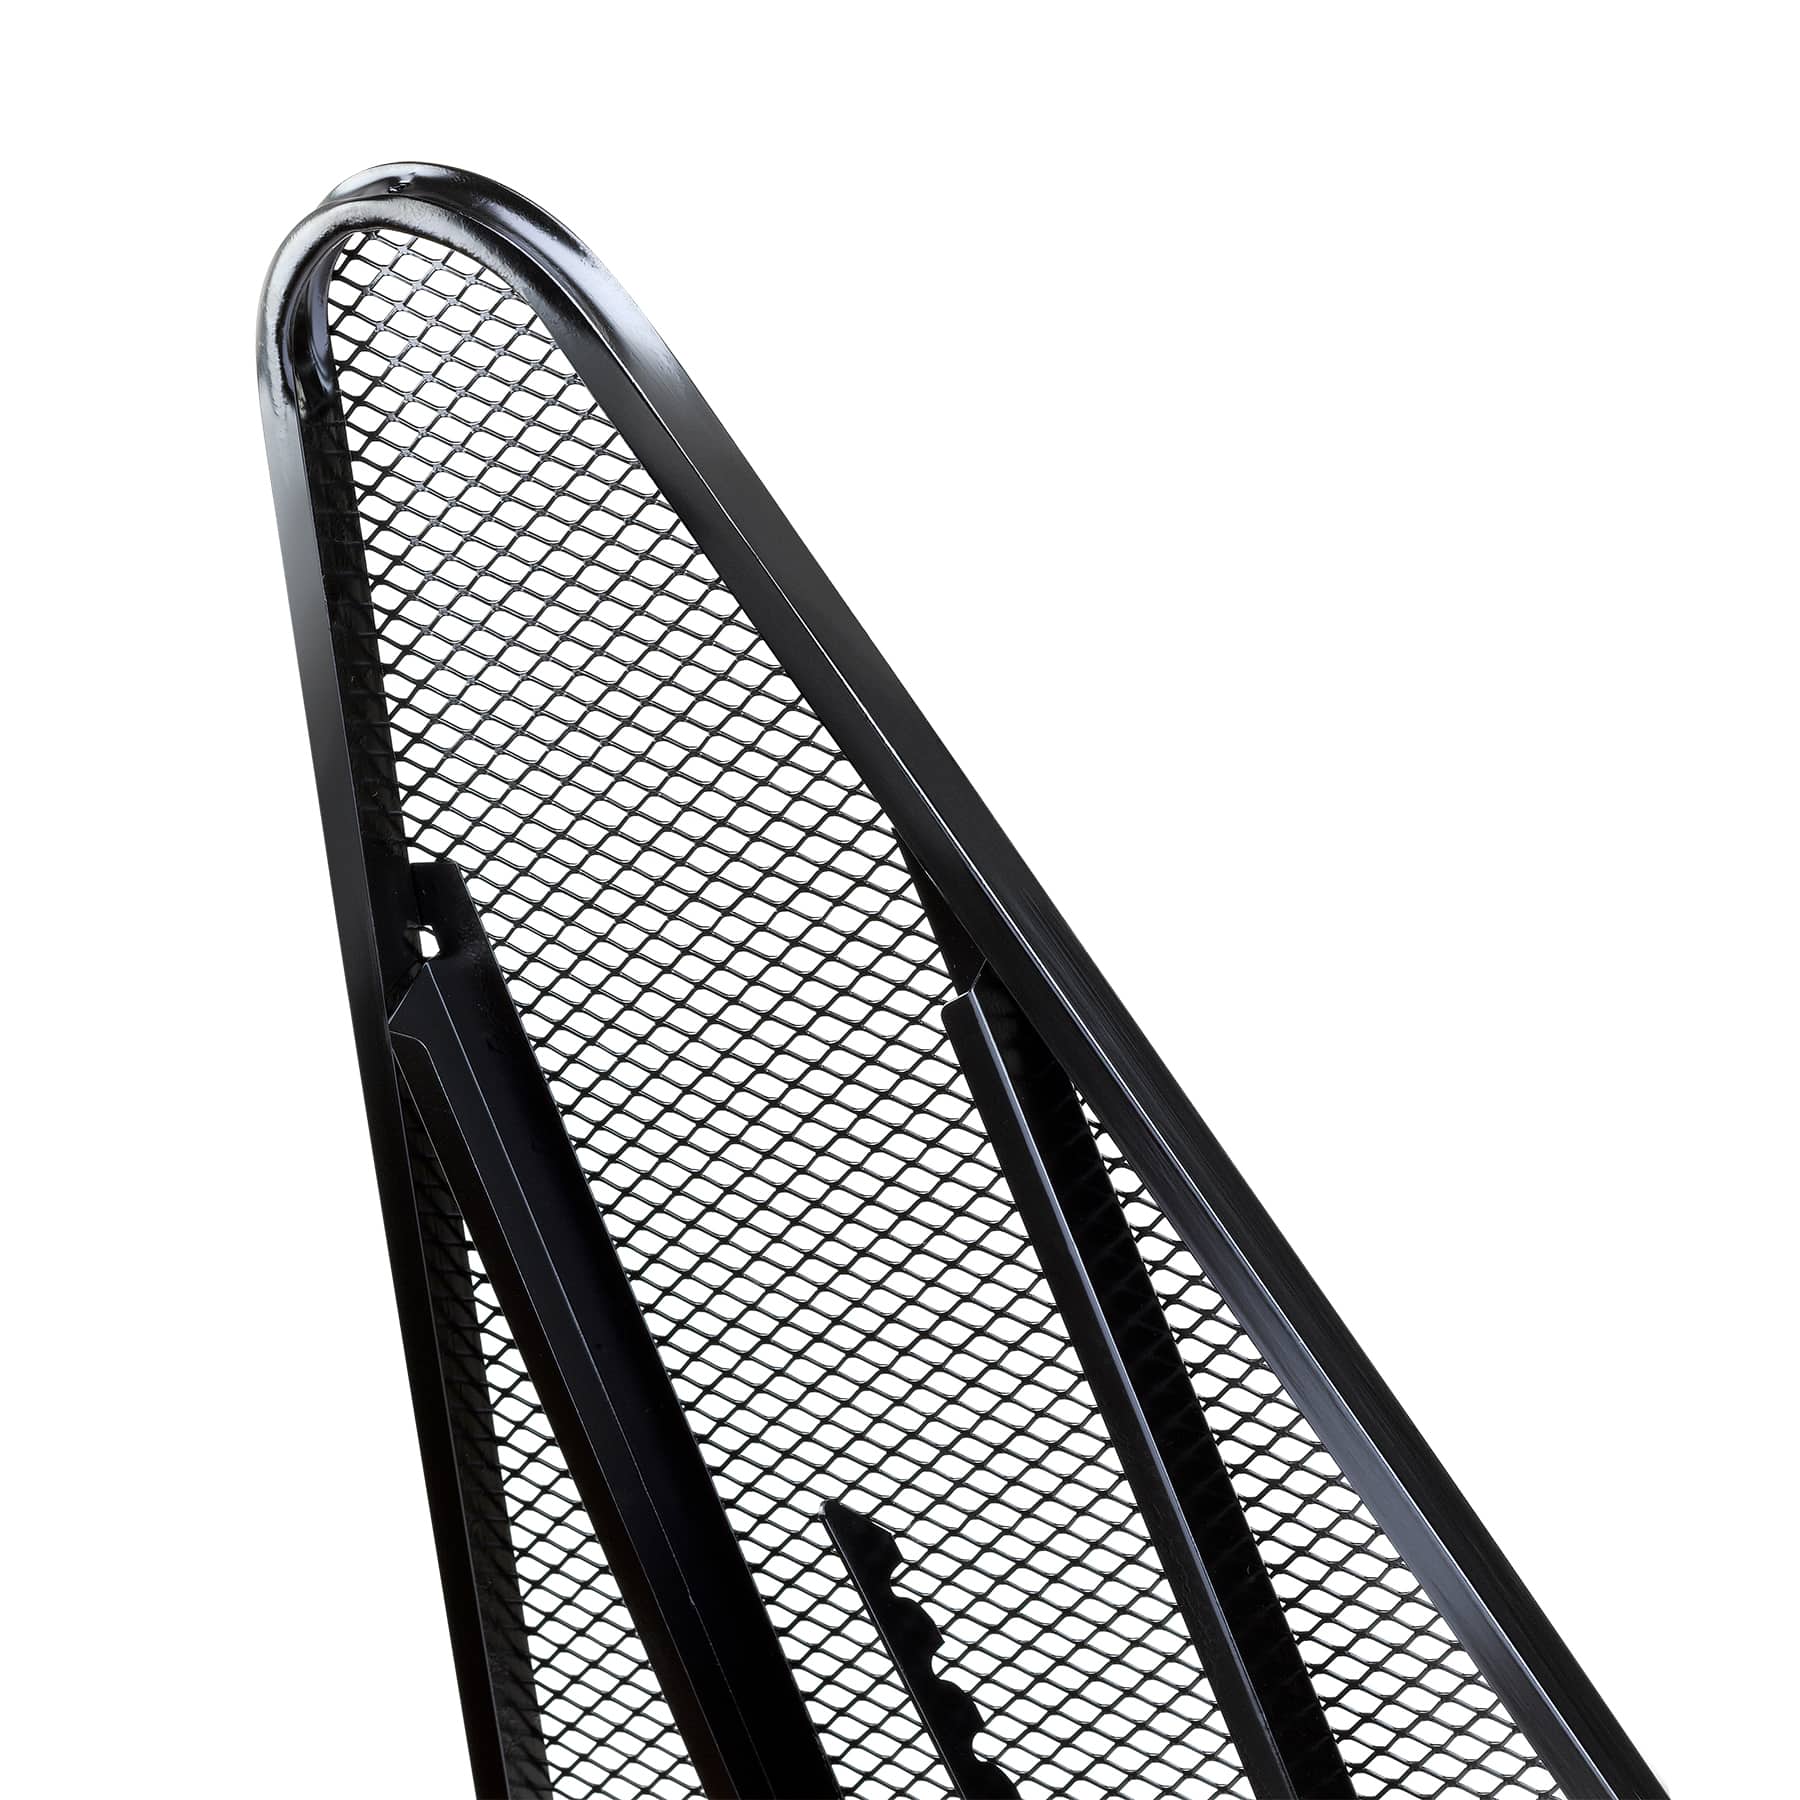 The Board 120IB Home Ironing Board with VeraFoam Cover